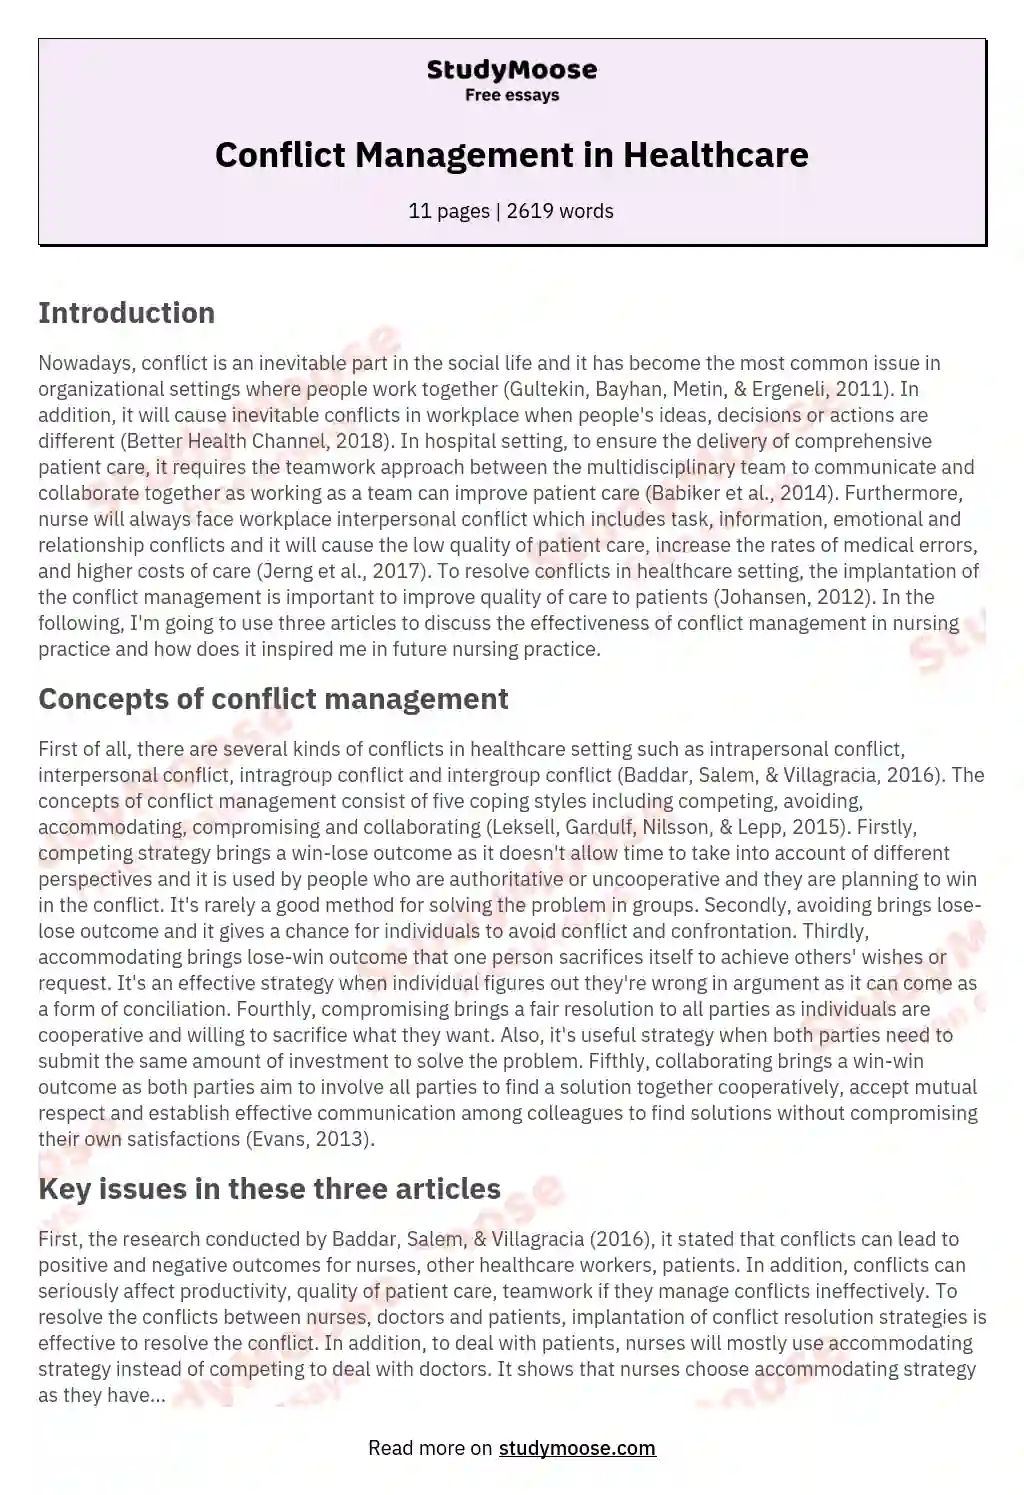 Conflict Management in Healthcare essay